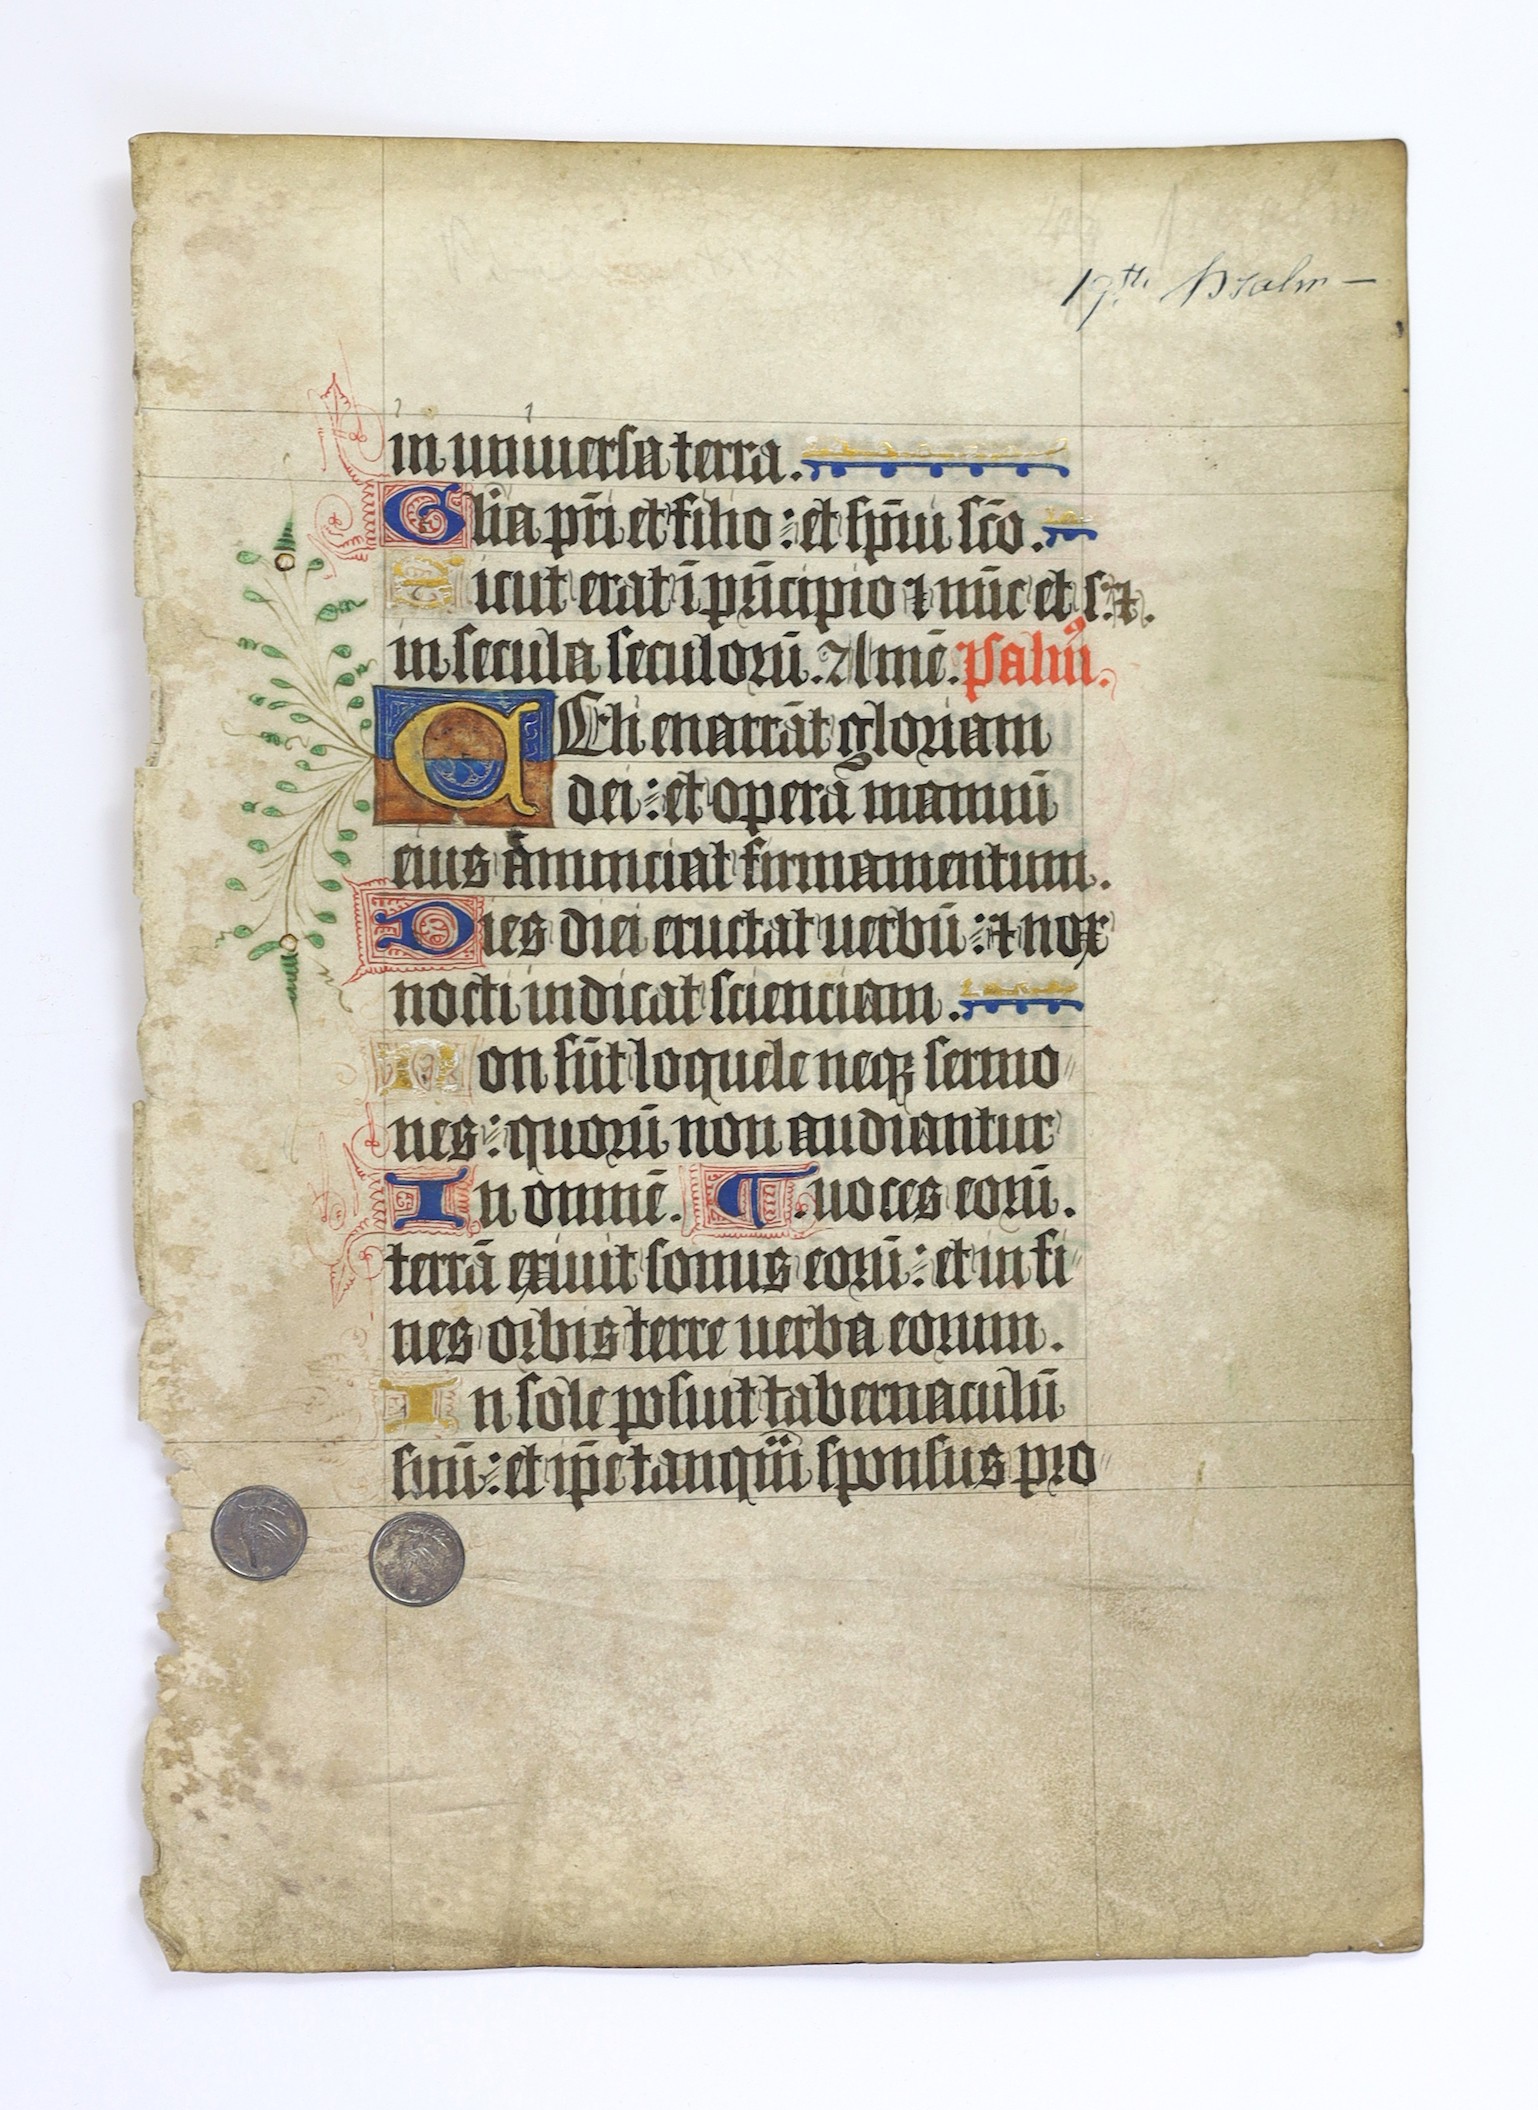 Manuscript leaf from a book of hours illuminated in blue, red, rose, green and gilt; perhaps English, third quarter of the 14th century